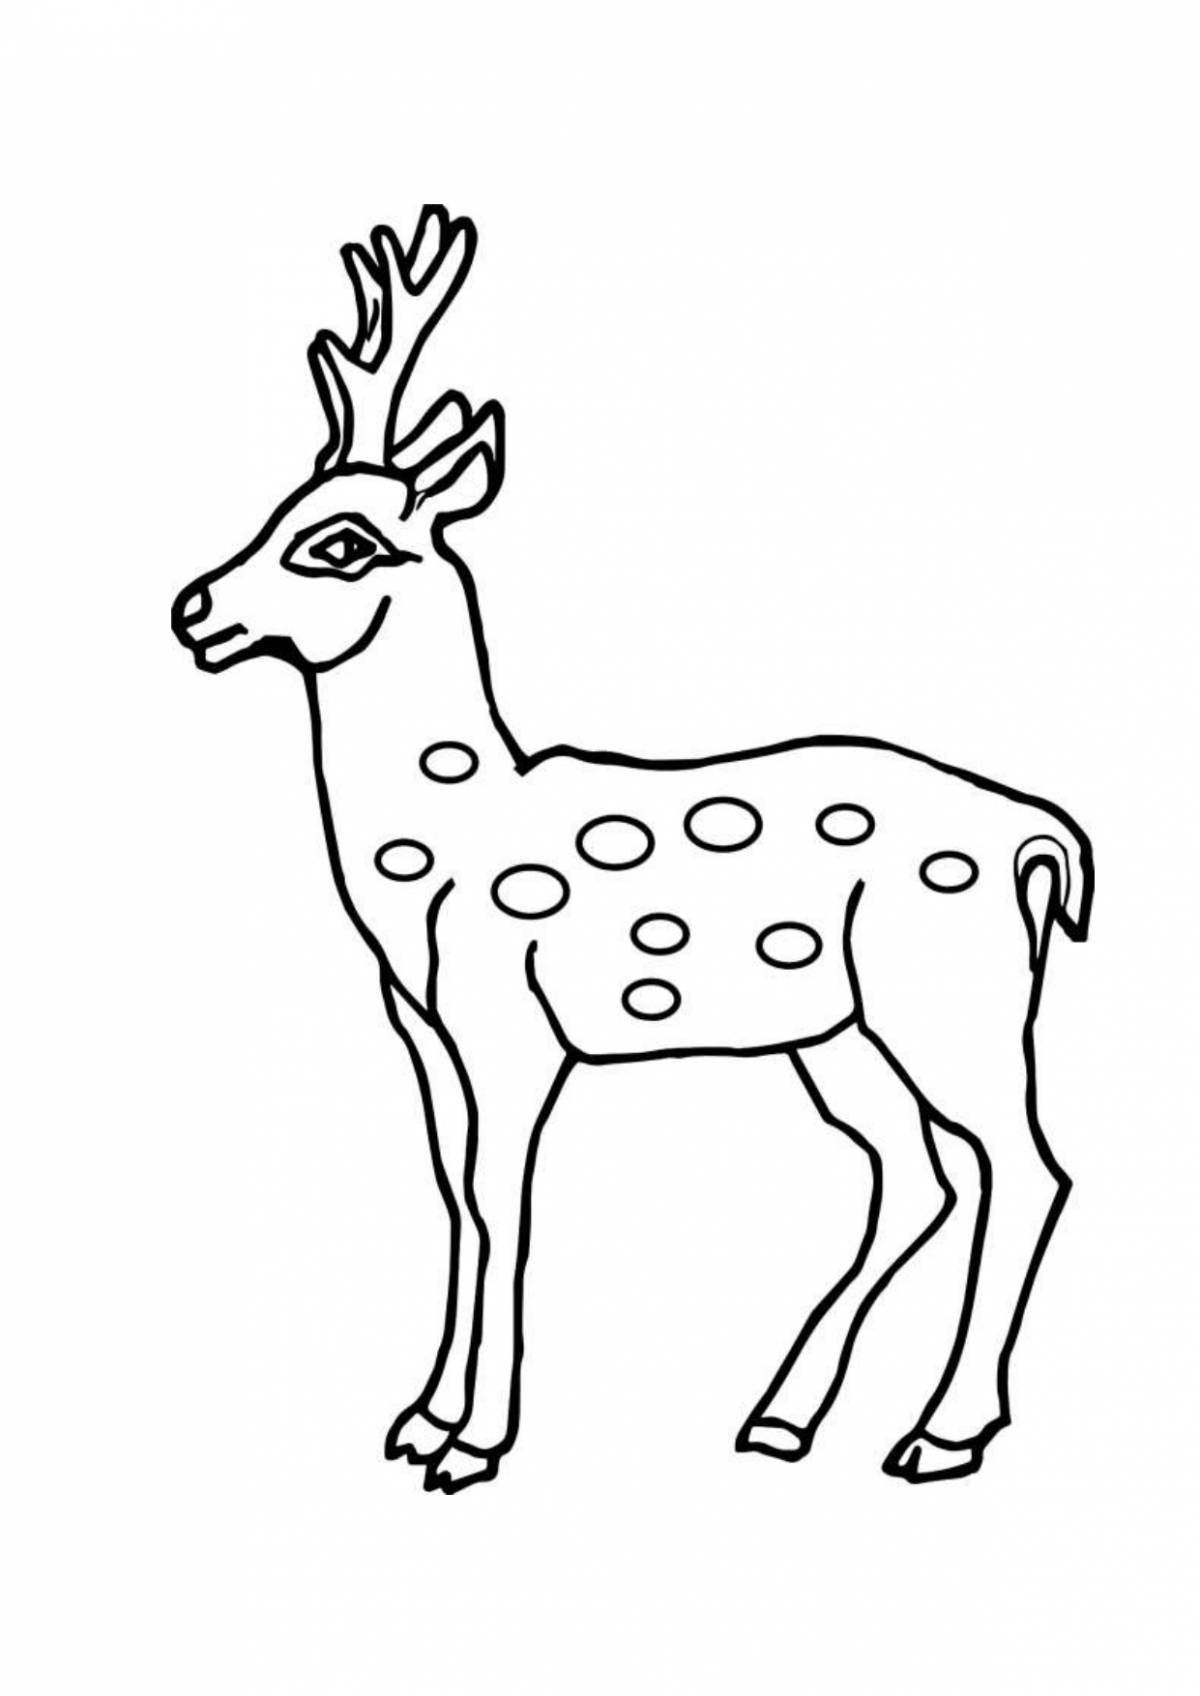 Glittering sika deer coloring page